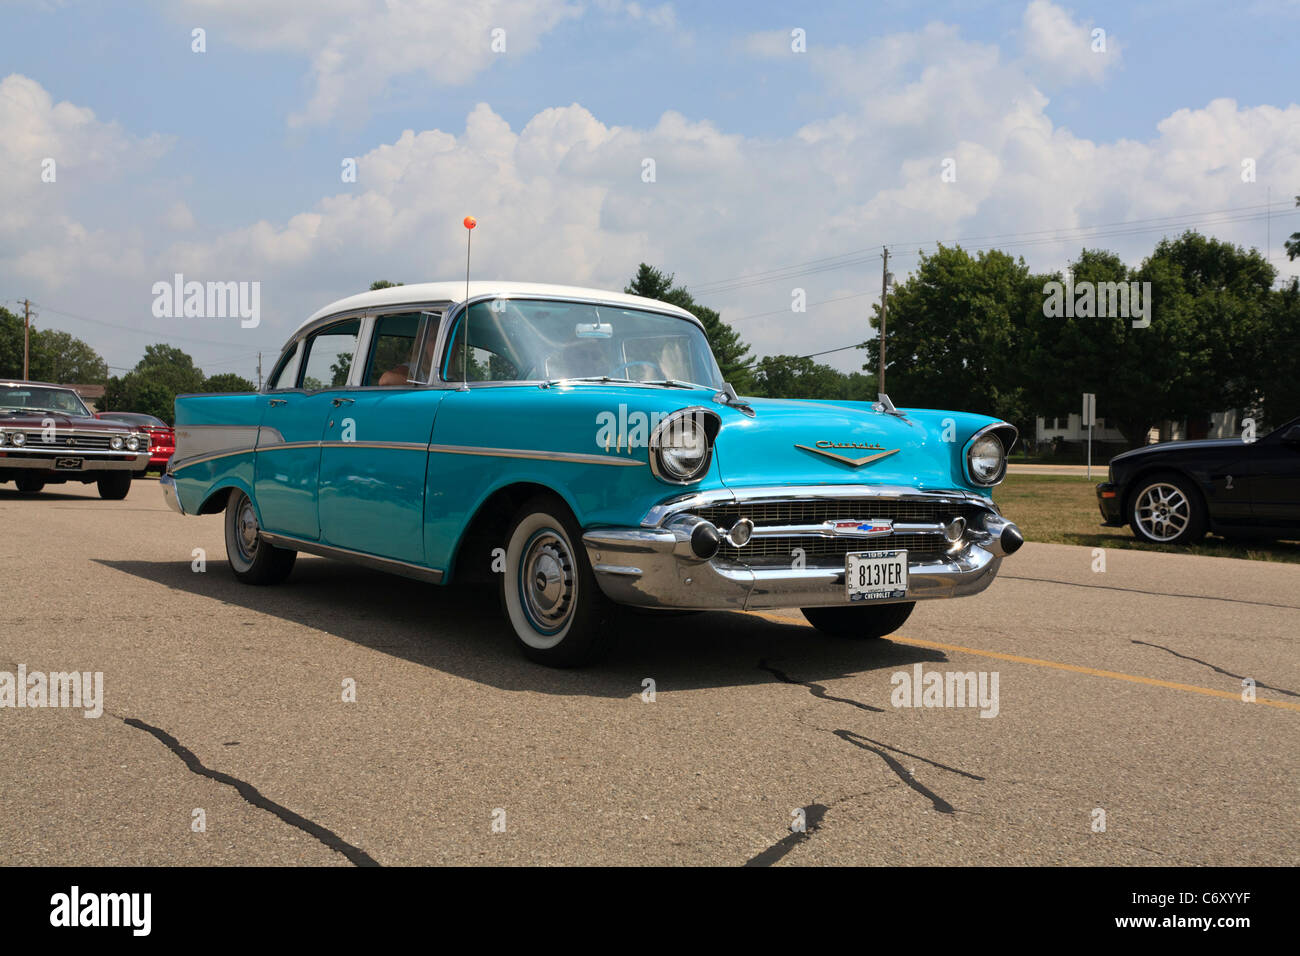 1957 Chevy Bel Air automobile. Foto Stock